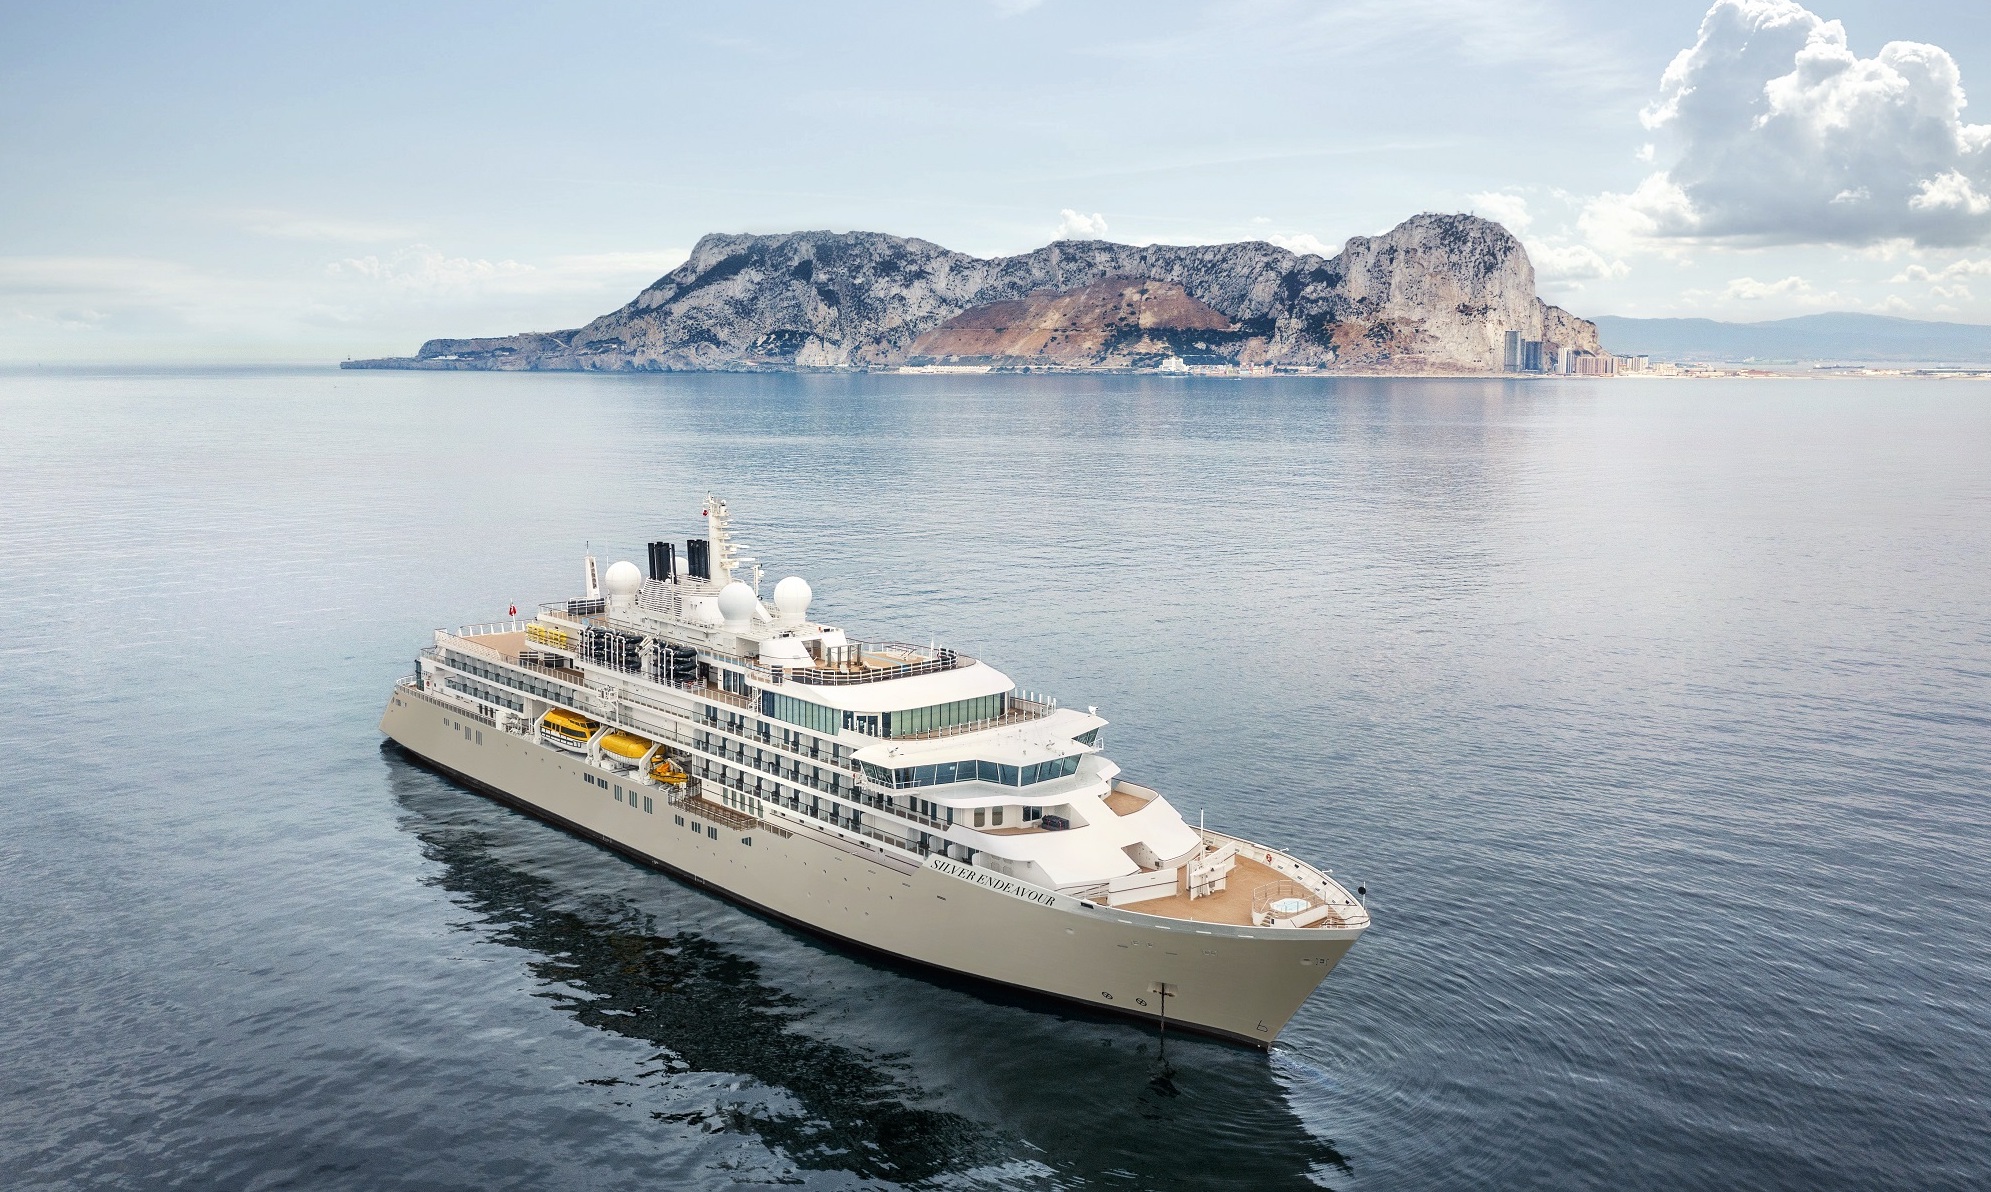 Silversea Cruises has welcomed Silver Endeavour to its fleet as its 11th vessel and one of the world’s most luxurious expedition ships.